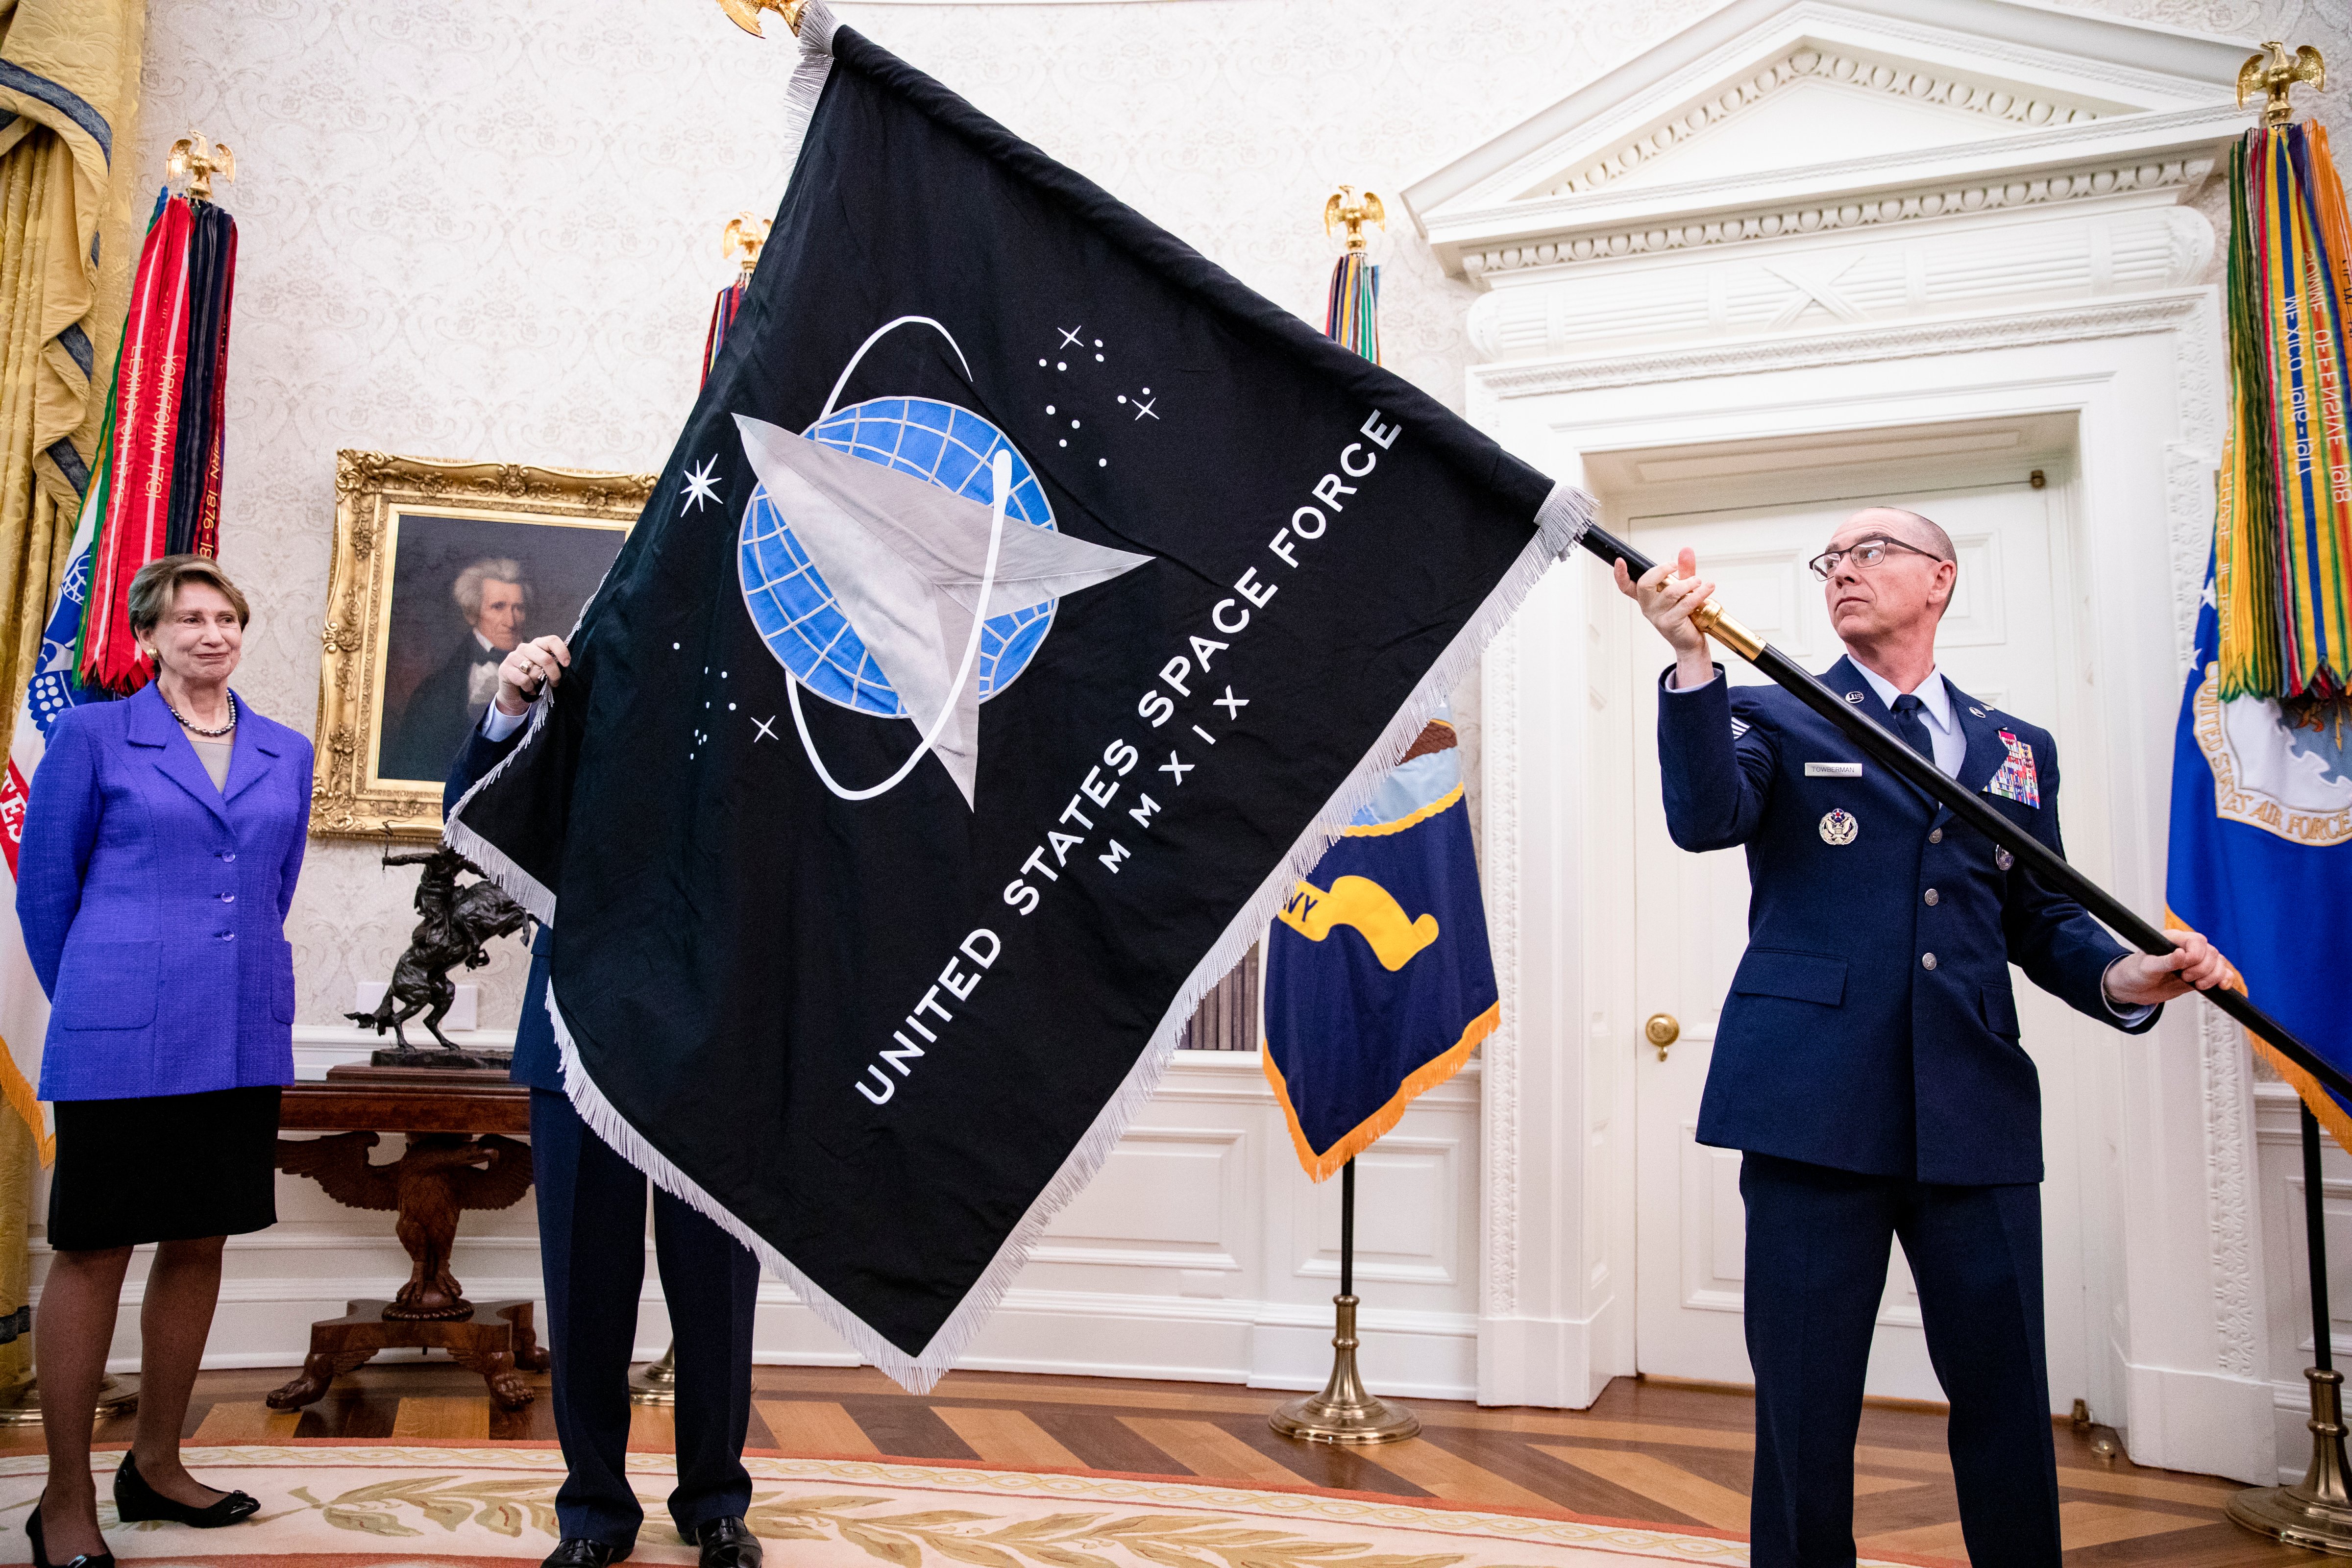 The flag of the U.S. Space Force was unveiled to then-President Donald Trump, in the Oval Office, on May 15, 2020 (Photo by Samuel Corum-Pool/Getty Images)